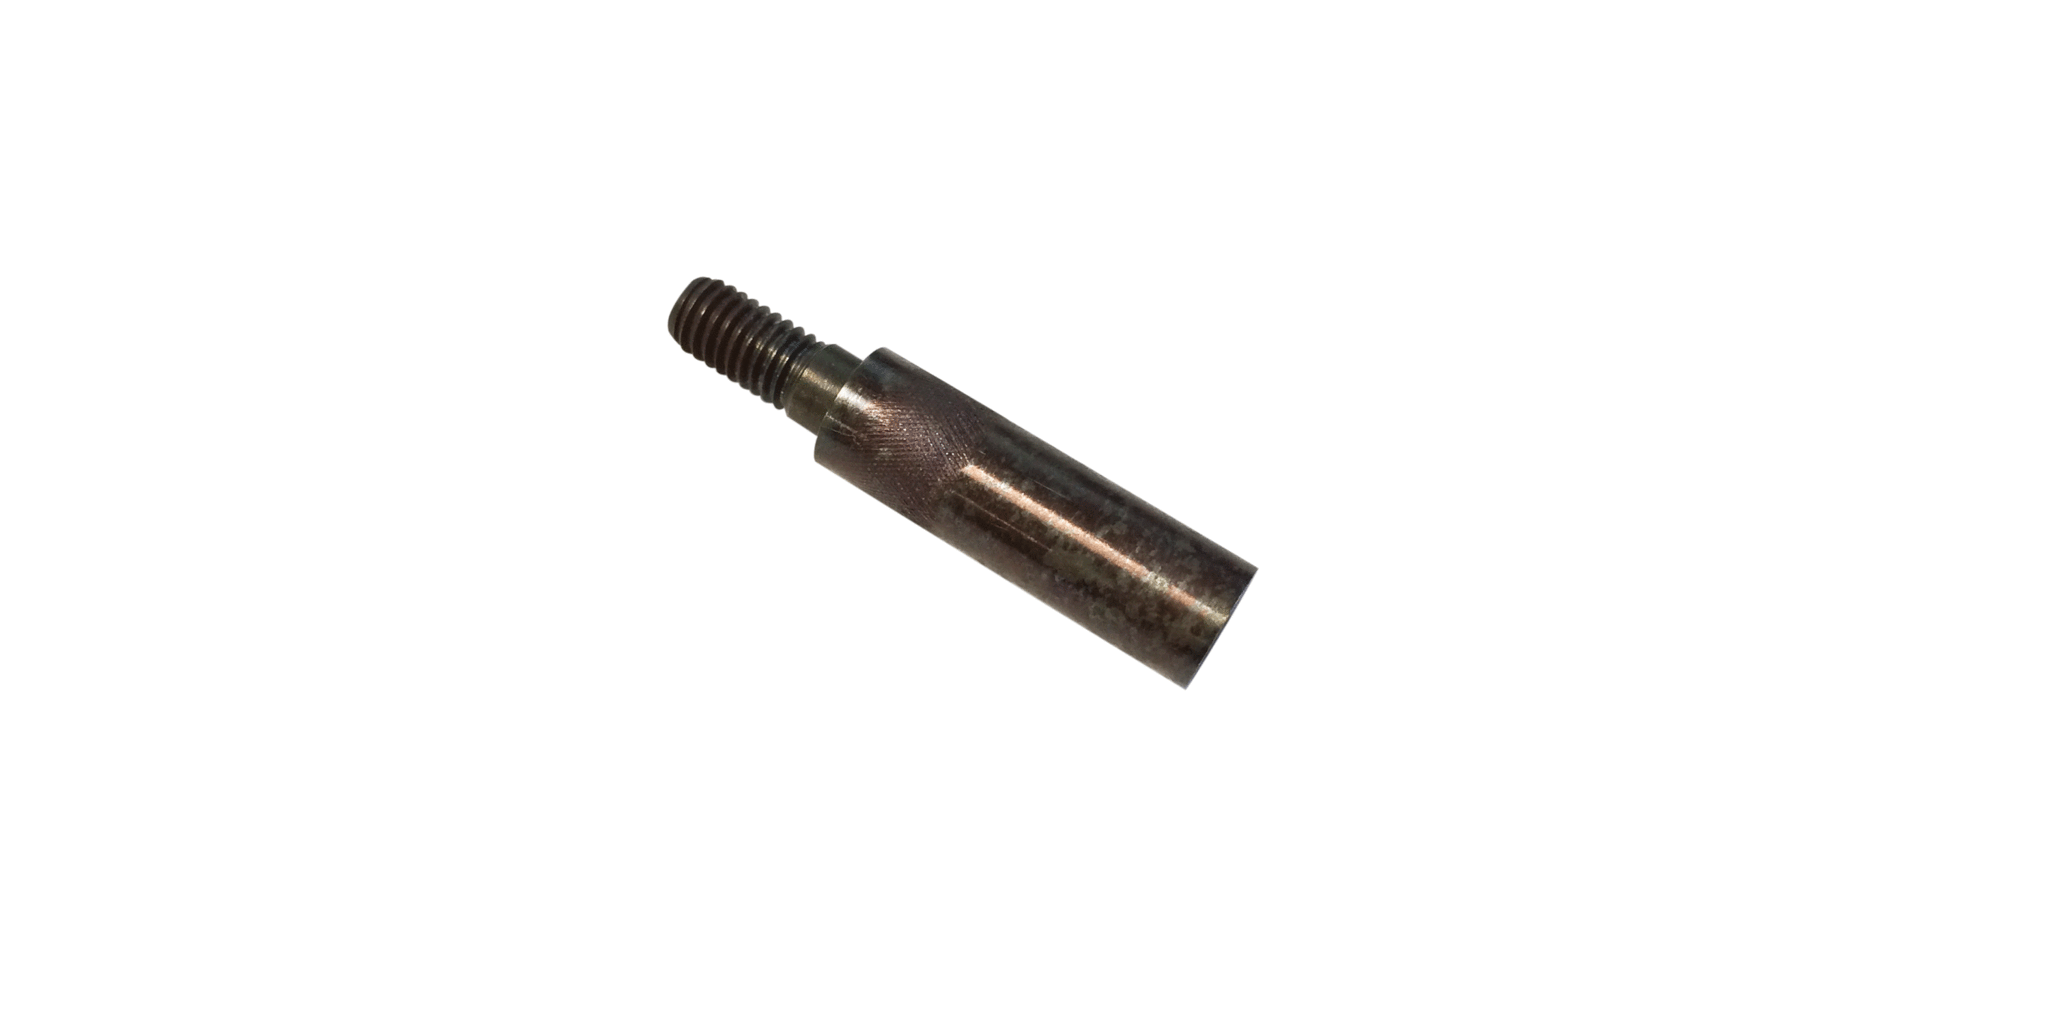 RIFFE Spearhead Adapter 5/16 - 6mm thread 17/4 heat treated stainless –  RIFFE Web Store